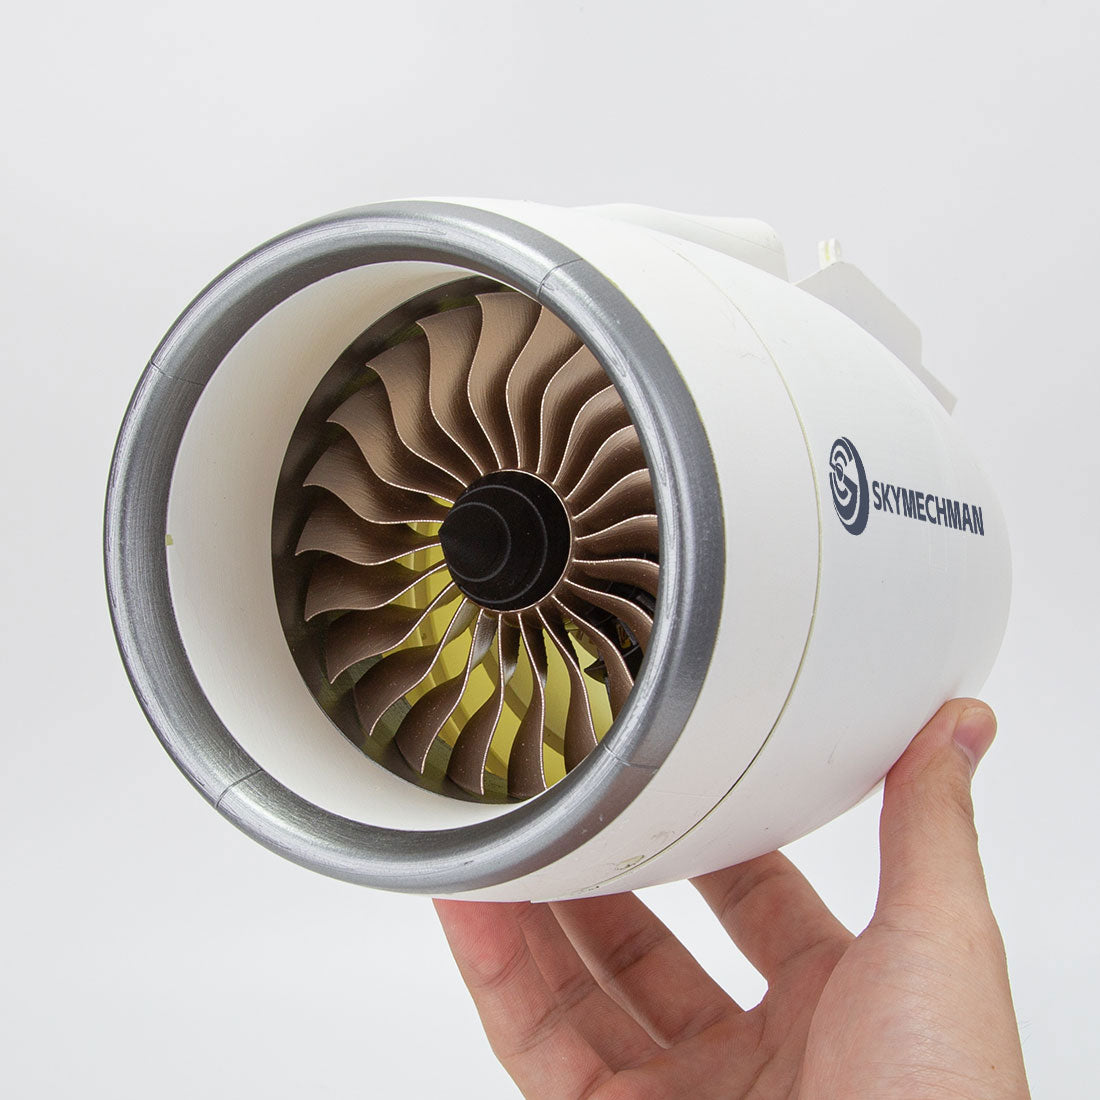 3D Printed Aircraft Turbofan Engine Assembly Model 1/30 Scale NTR-900